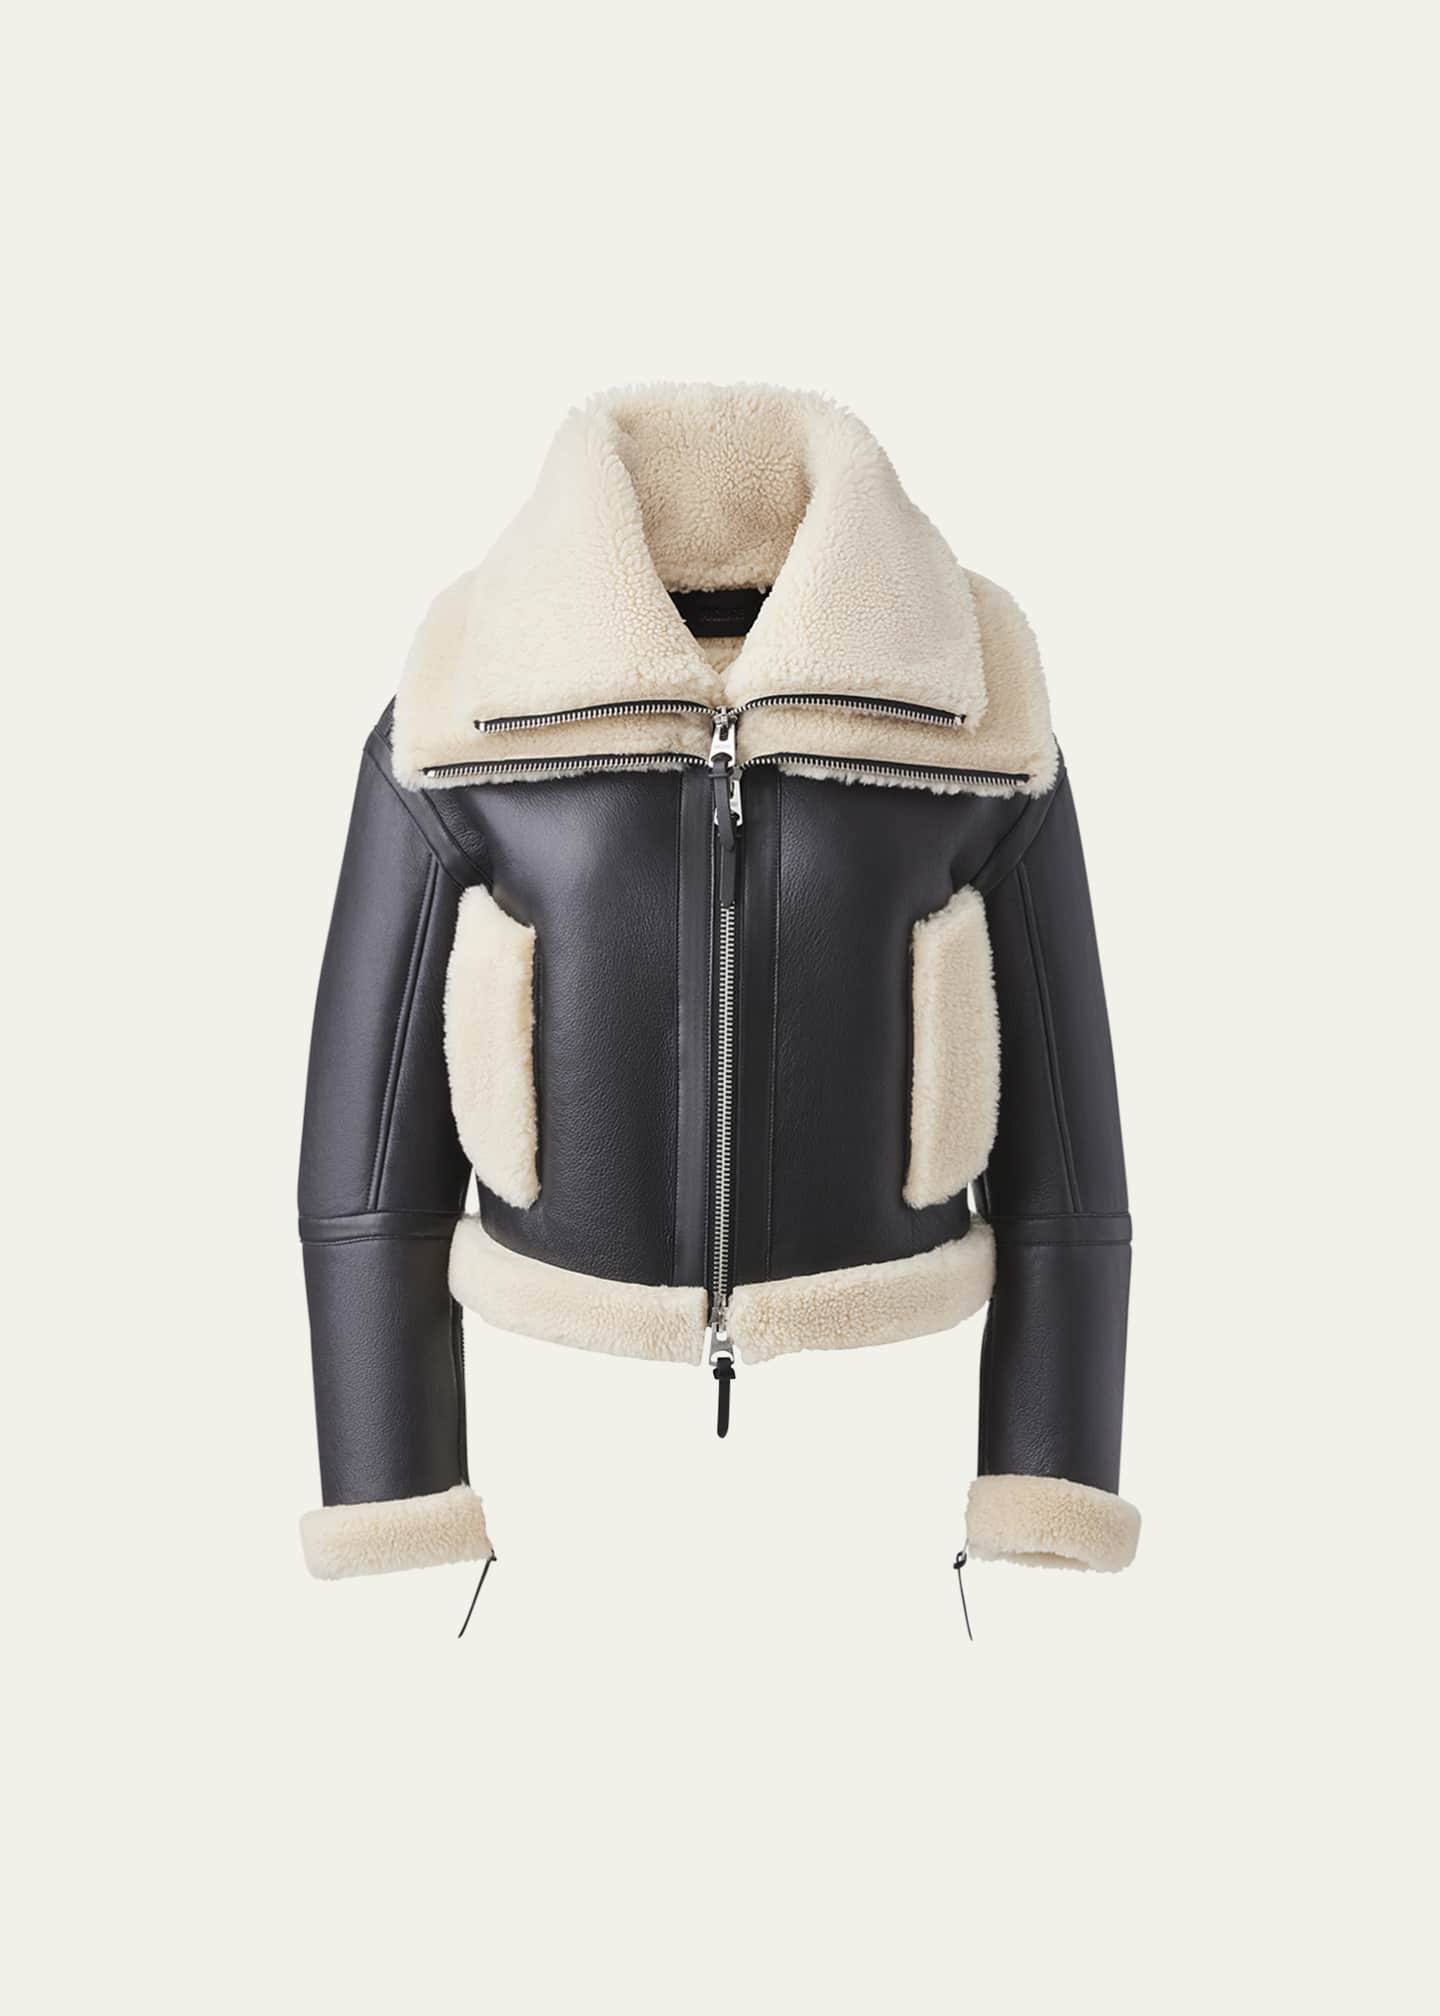 Gucci Fur jacket with double G logo  Clothes design, Shearling jacket  women, Clothes